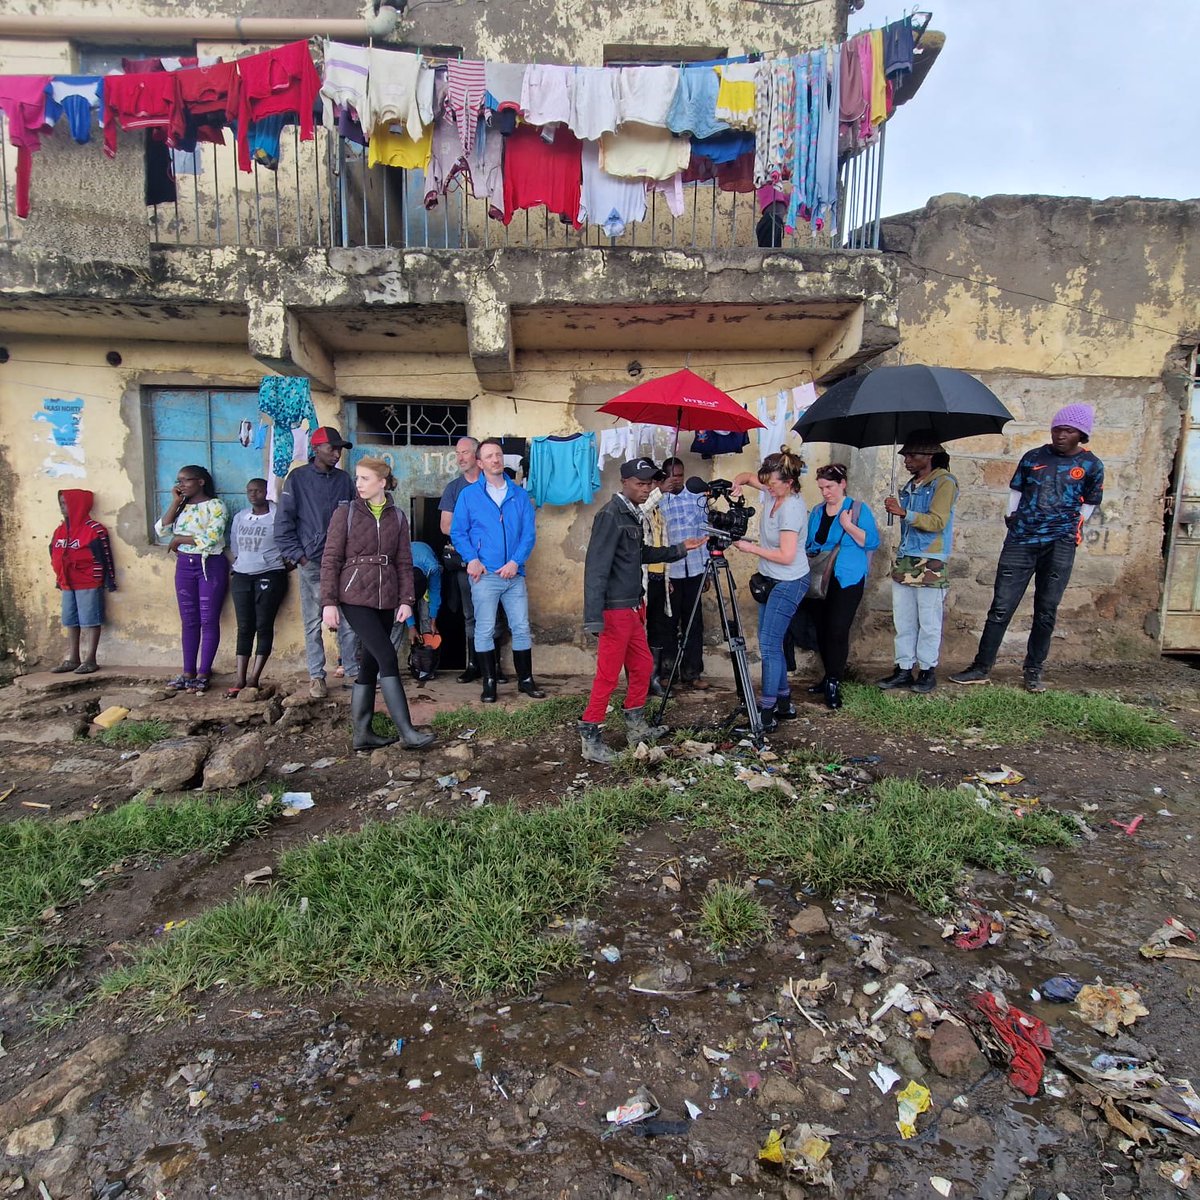 Hundreds of thousands of items of fashion waste from the EU end up in Kenya’s largest landfill site. The End of the World with Beanz explores this on RTÉ One tonight at 7pm. Thanks to Kite Entertainment and Frontline Films for having me as part of this important conversation.